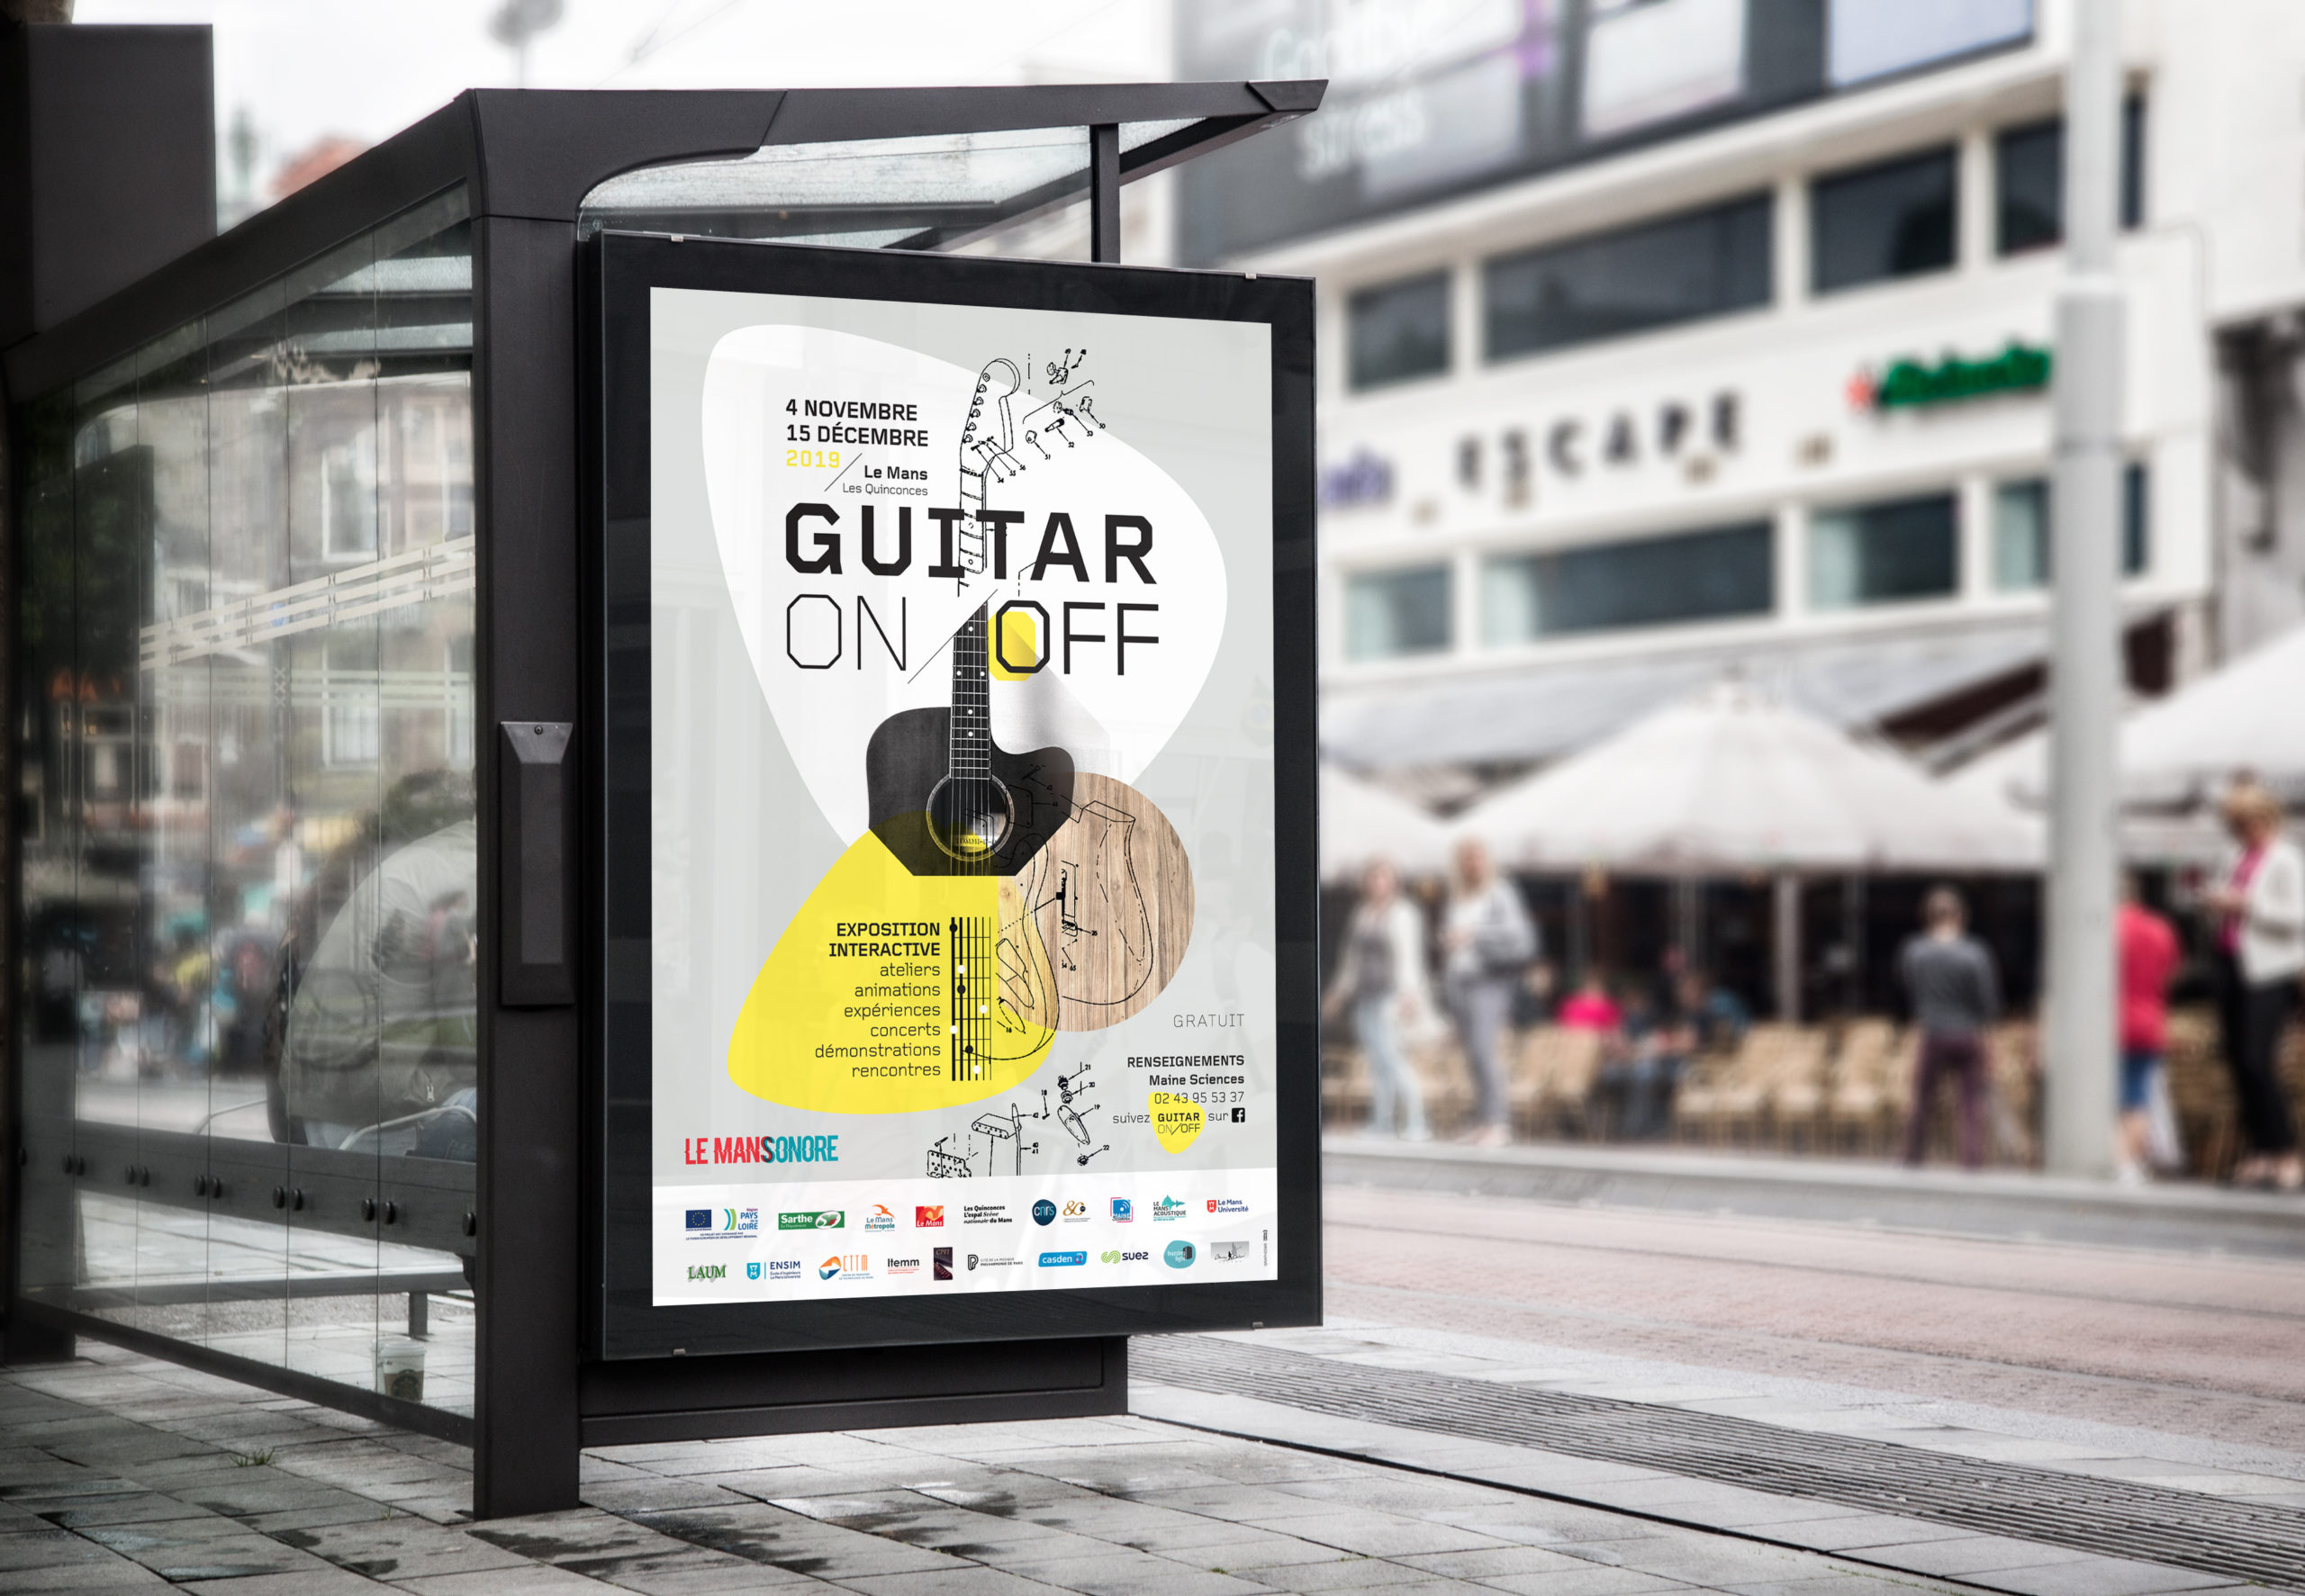 Guitare on off affiche helene laforet graphiste